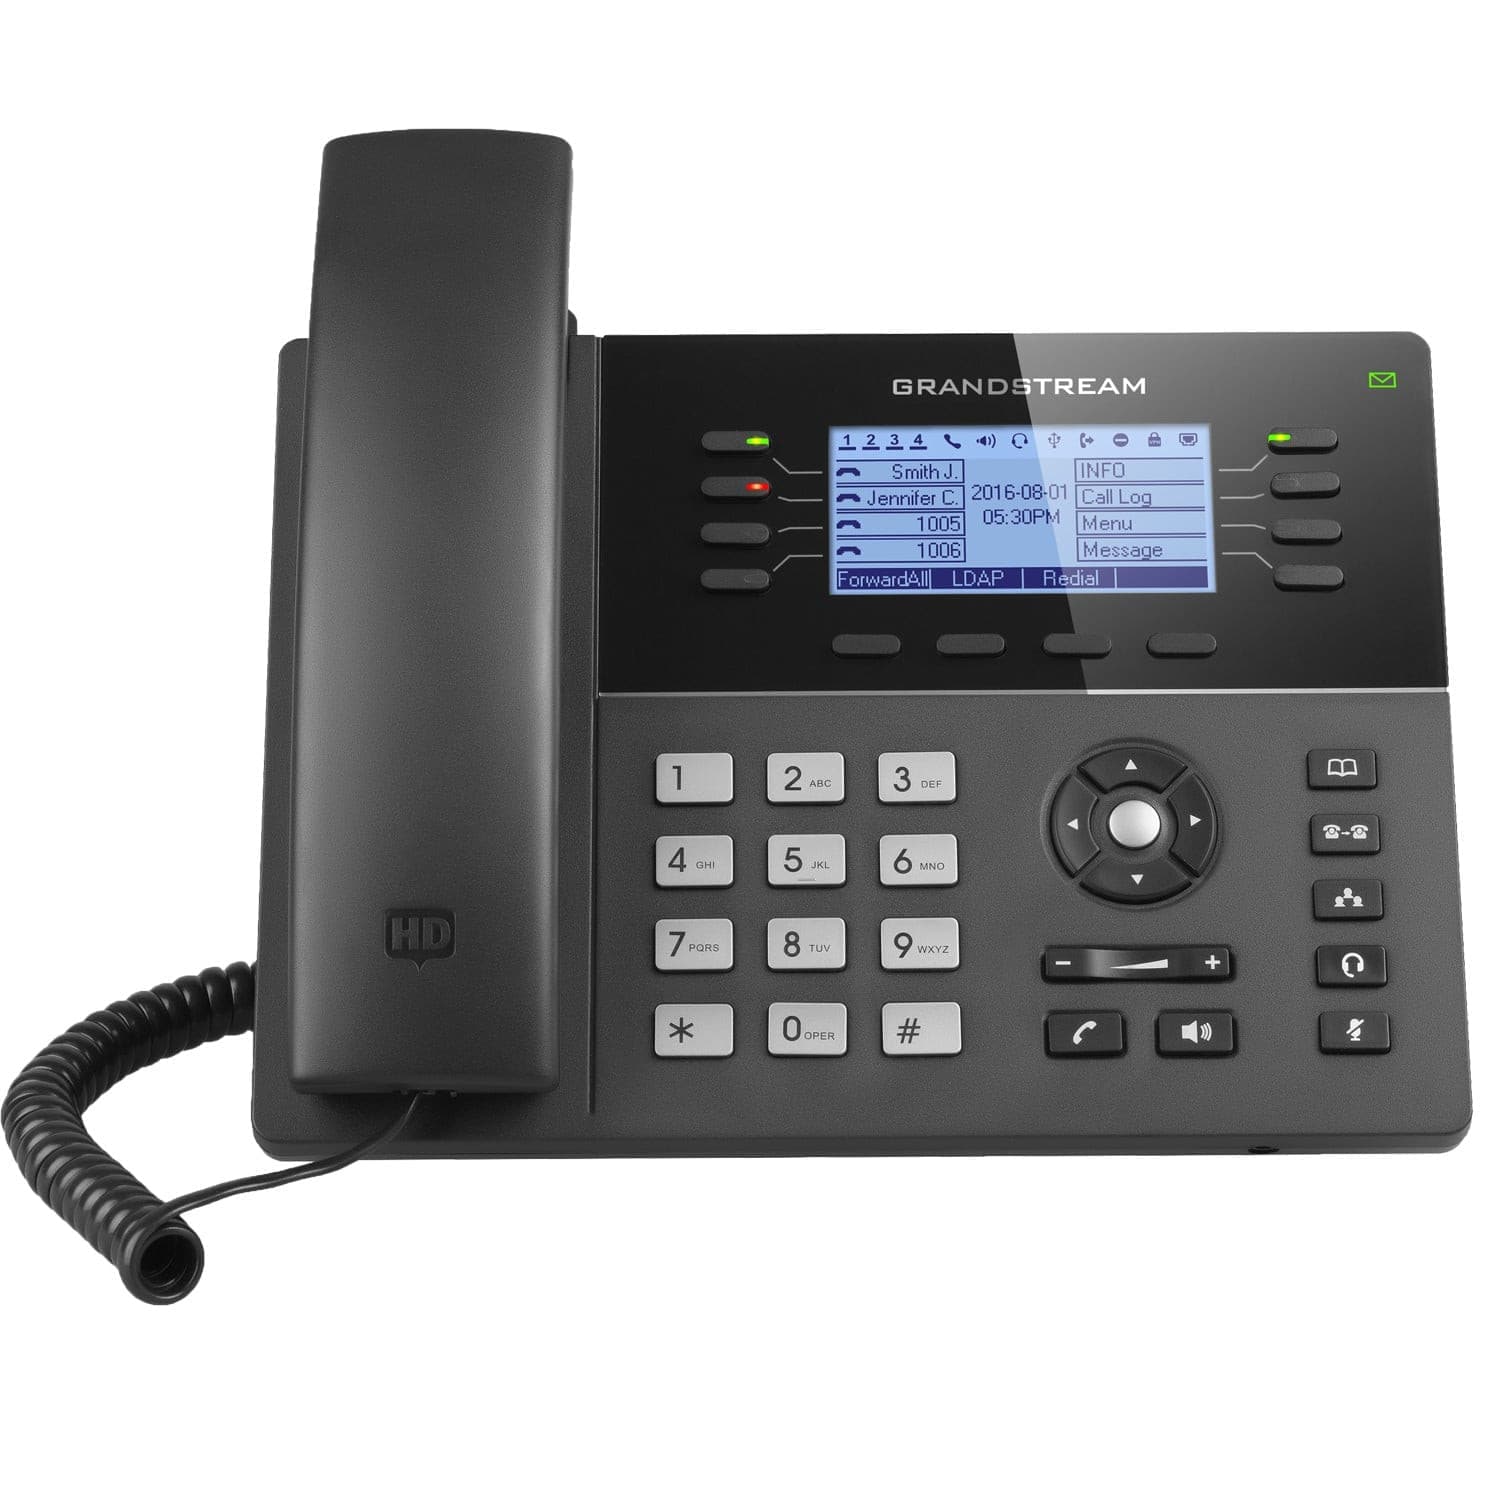 GXP1782 IP phone with advanced telephony features